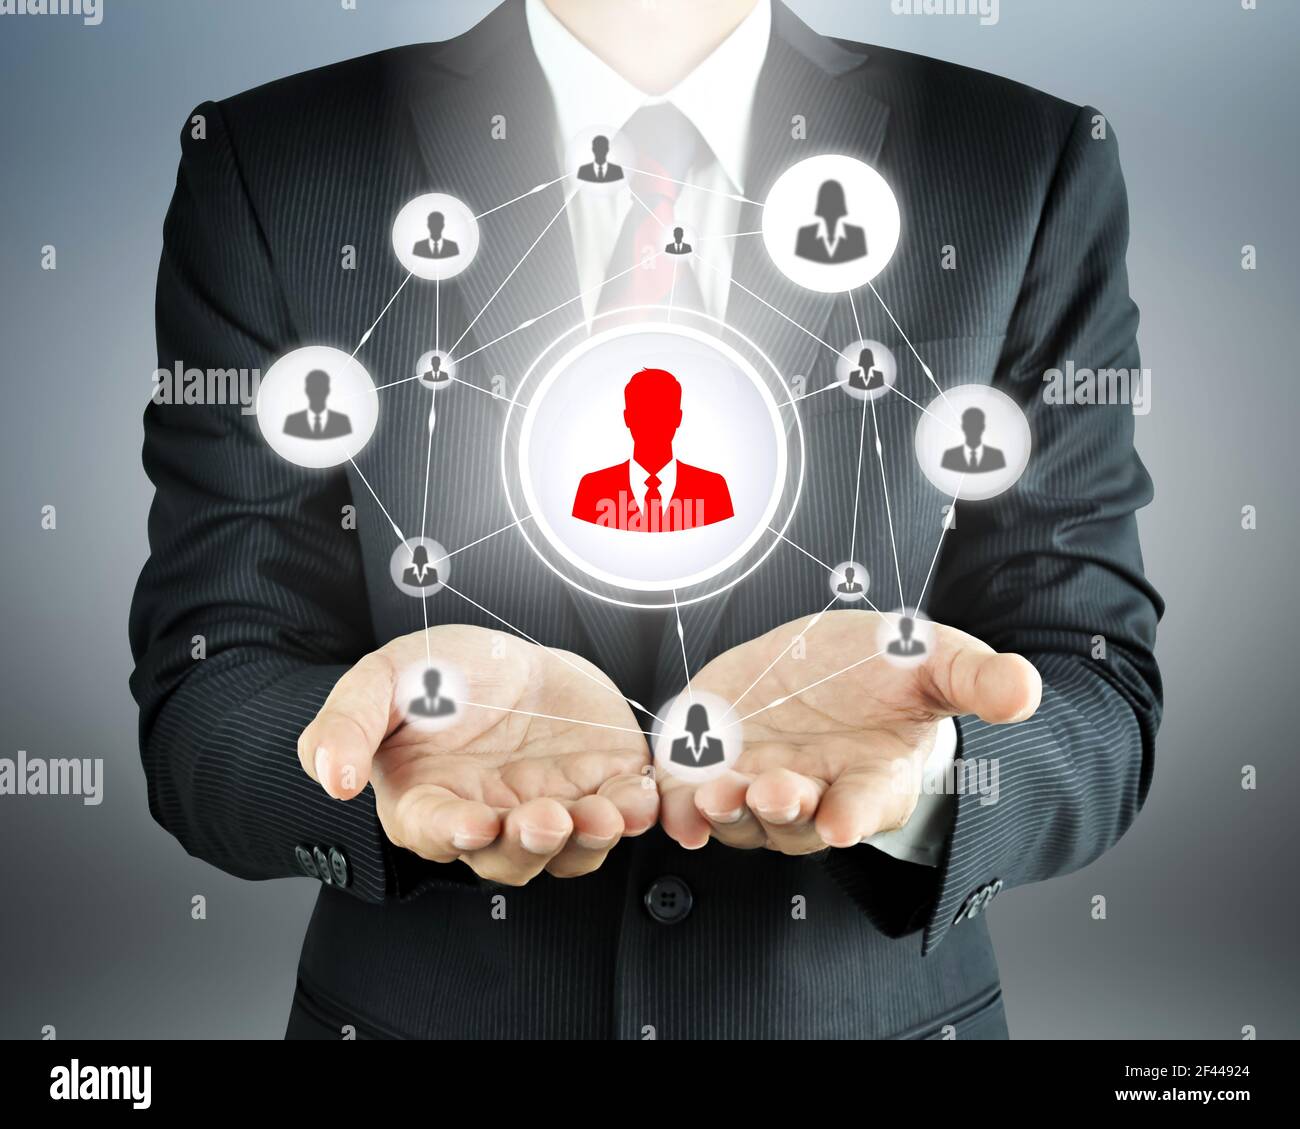 Hands carrying businesspeople icon network - HR, HRM, MLM & teamwork concepts Stock Photo